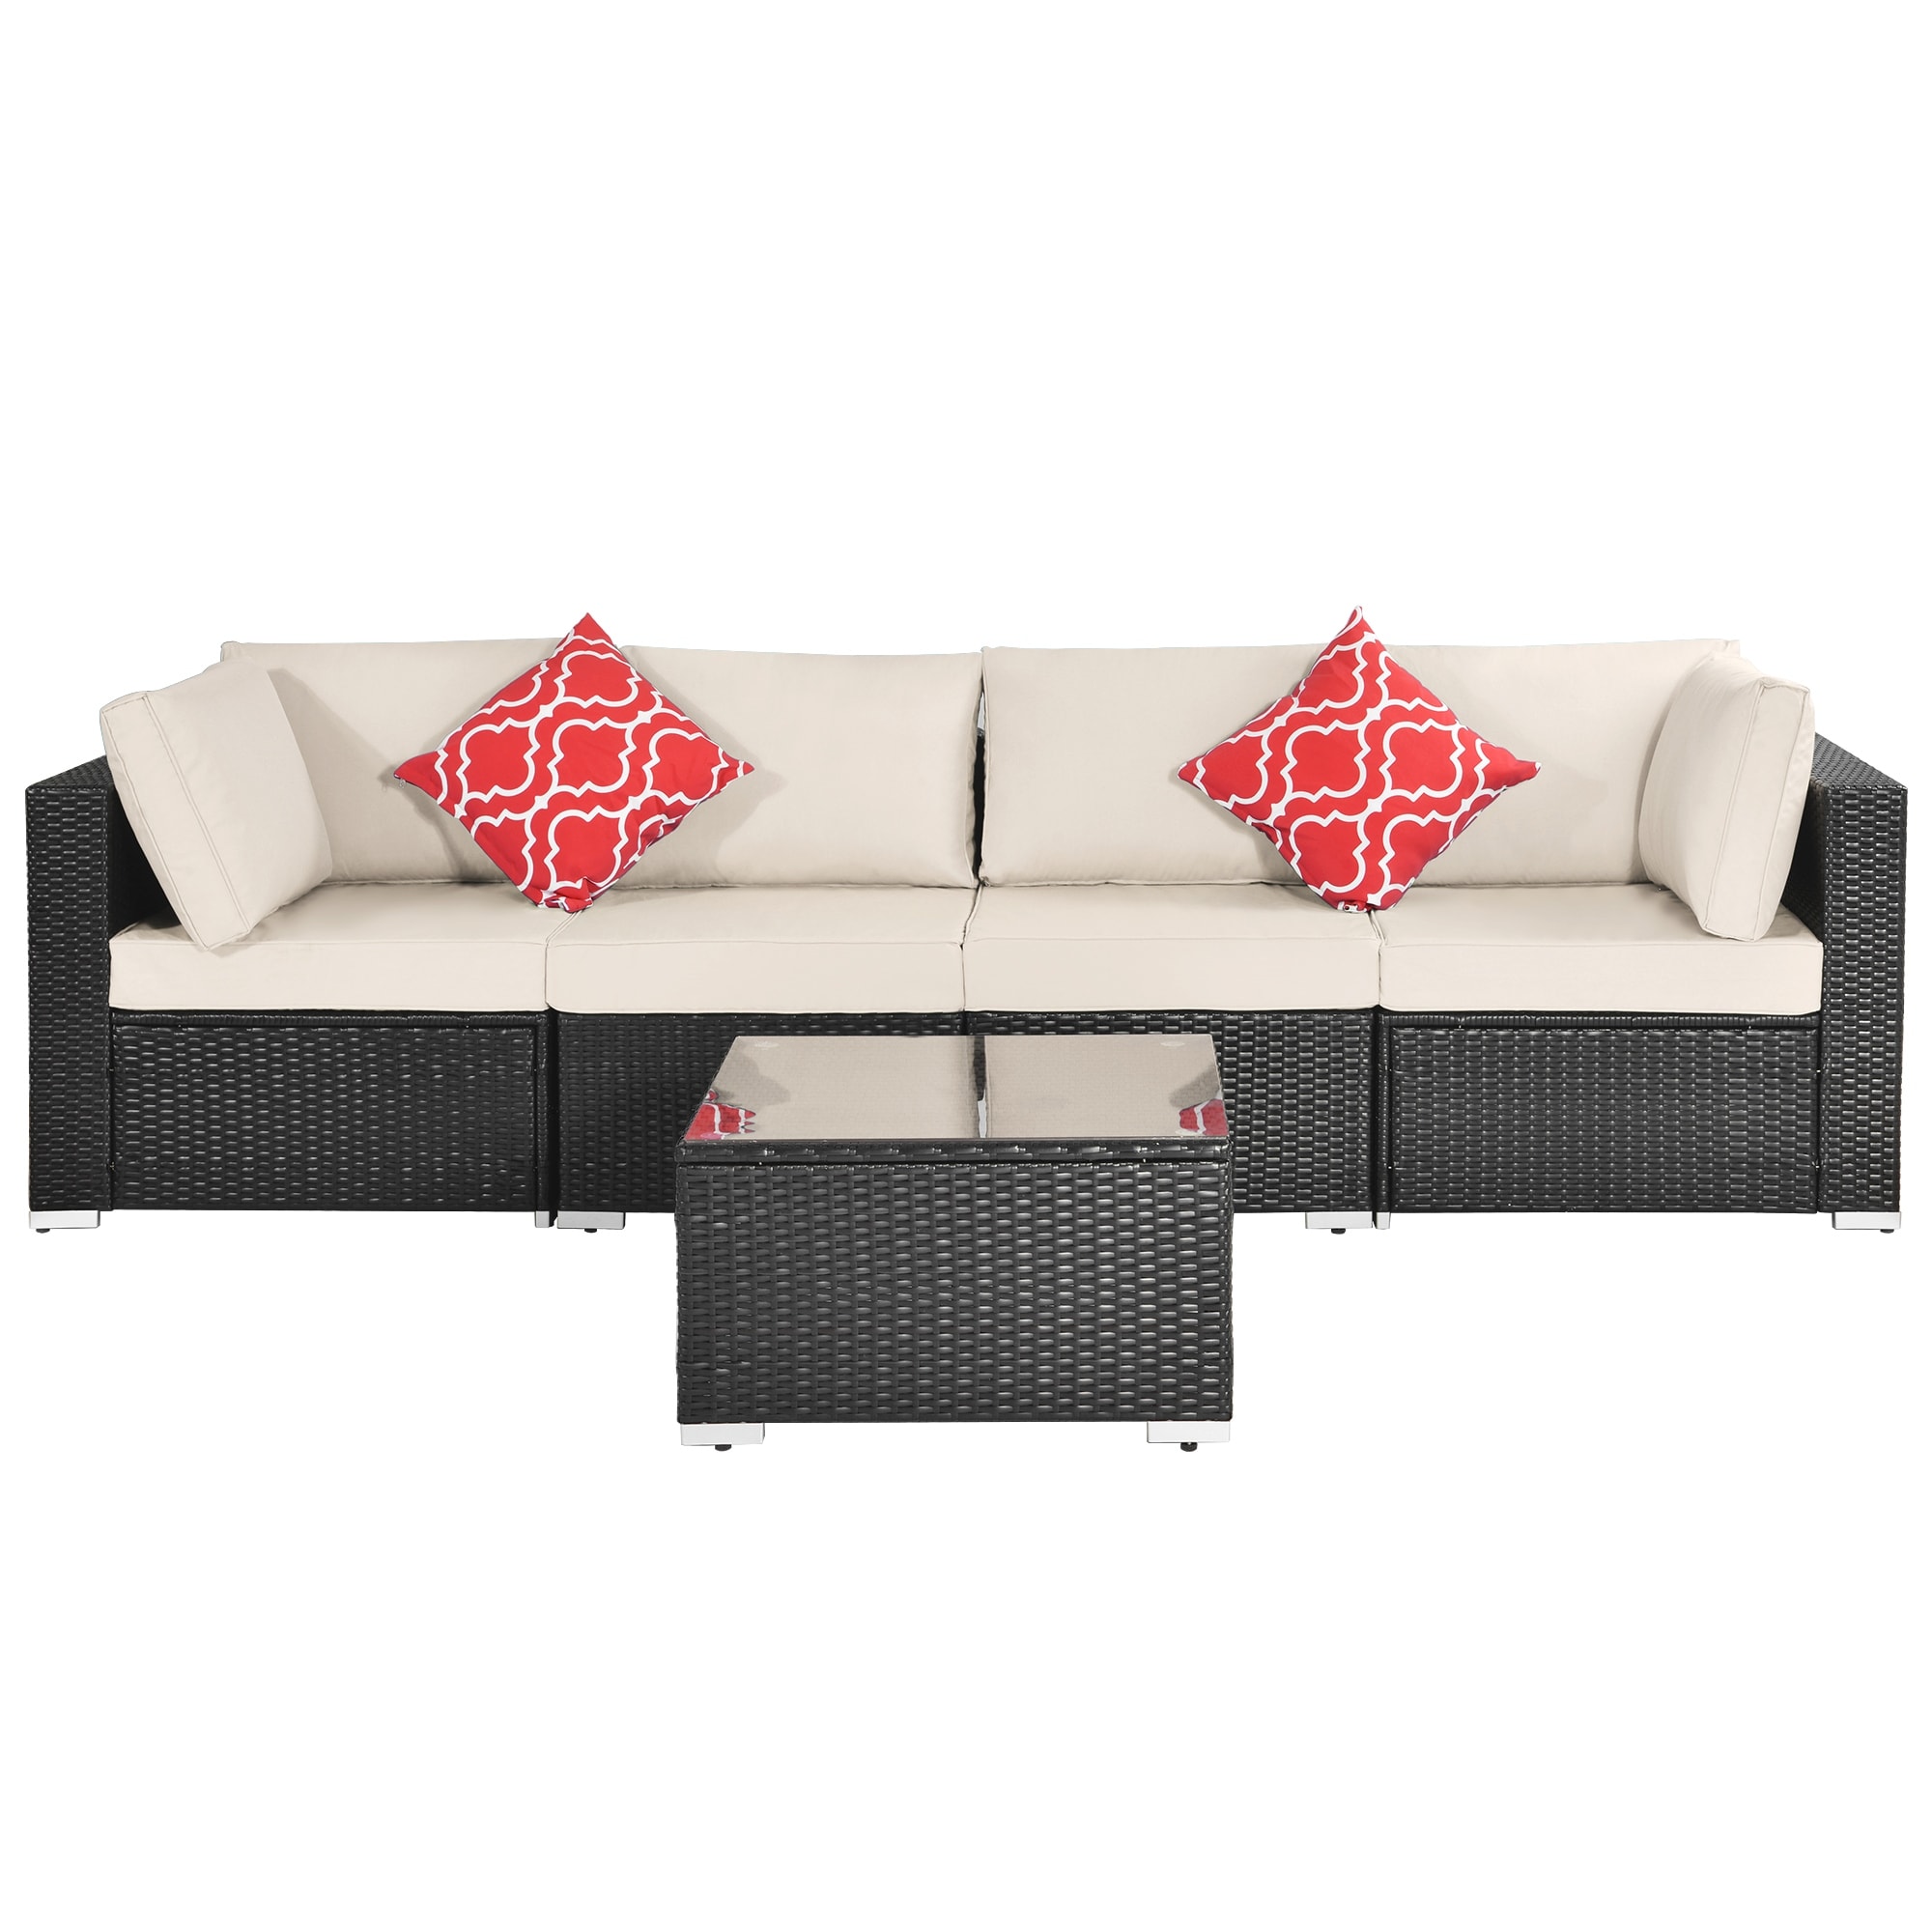 Outdoor Garden Patio Furniture 5-piece Pe Rattan Wicker Sectional Cushioned Sofa Sets With 2 Pillows And Coffee Table